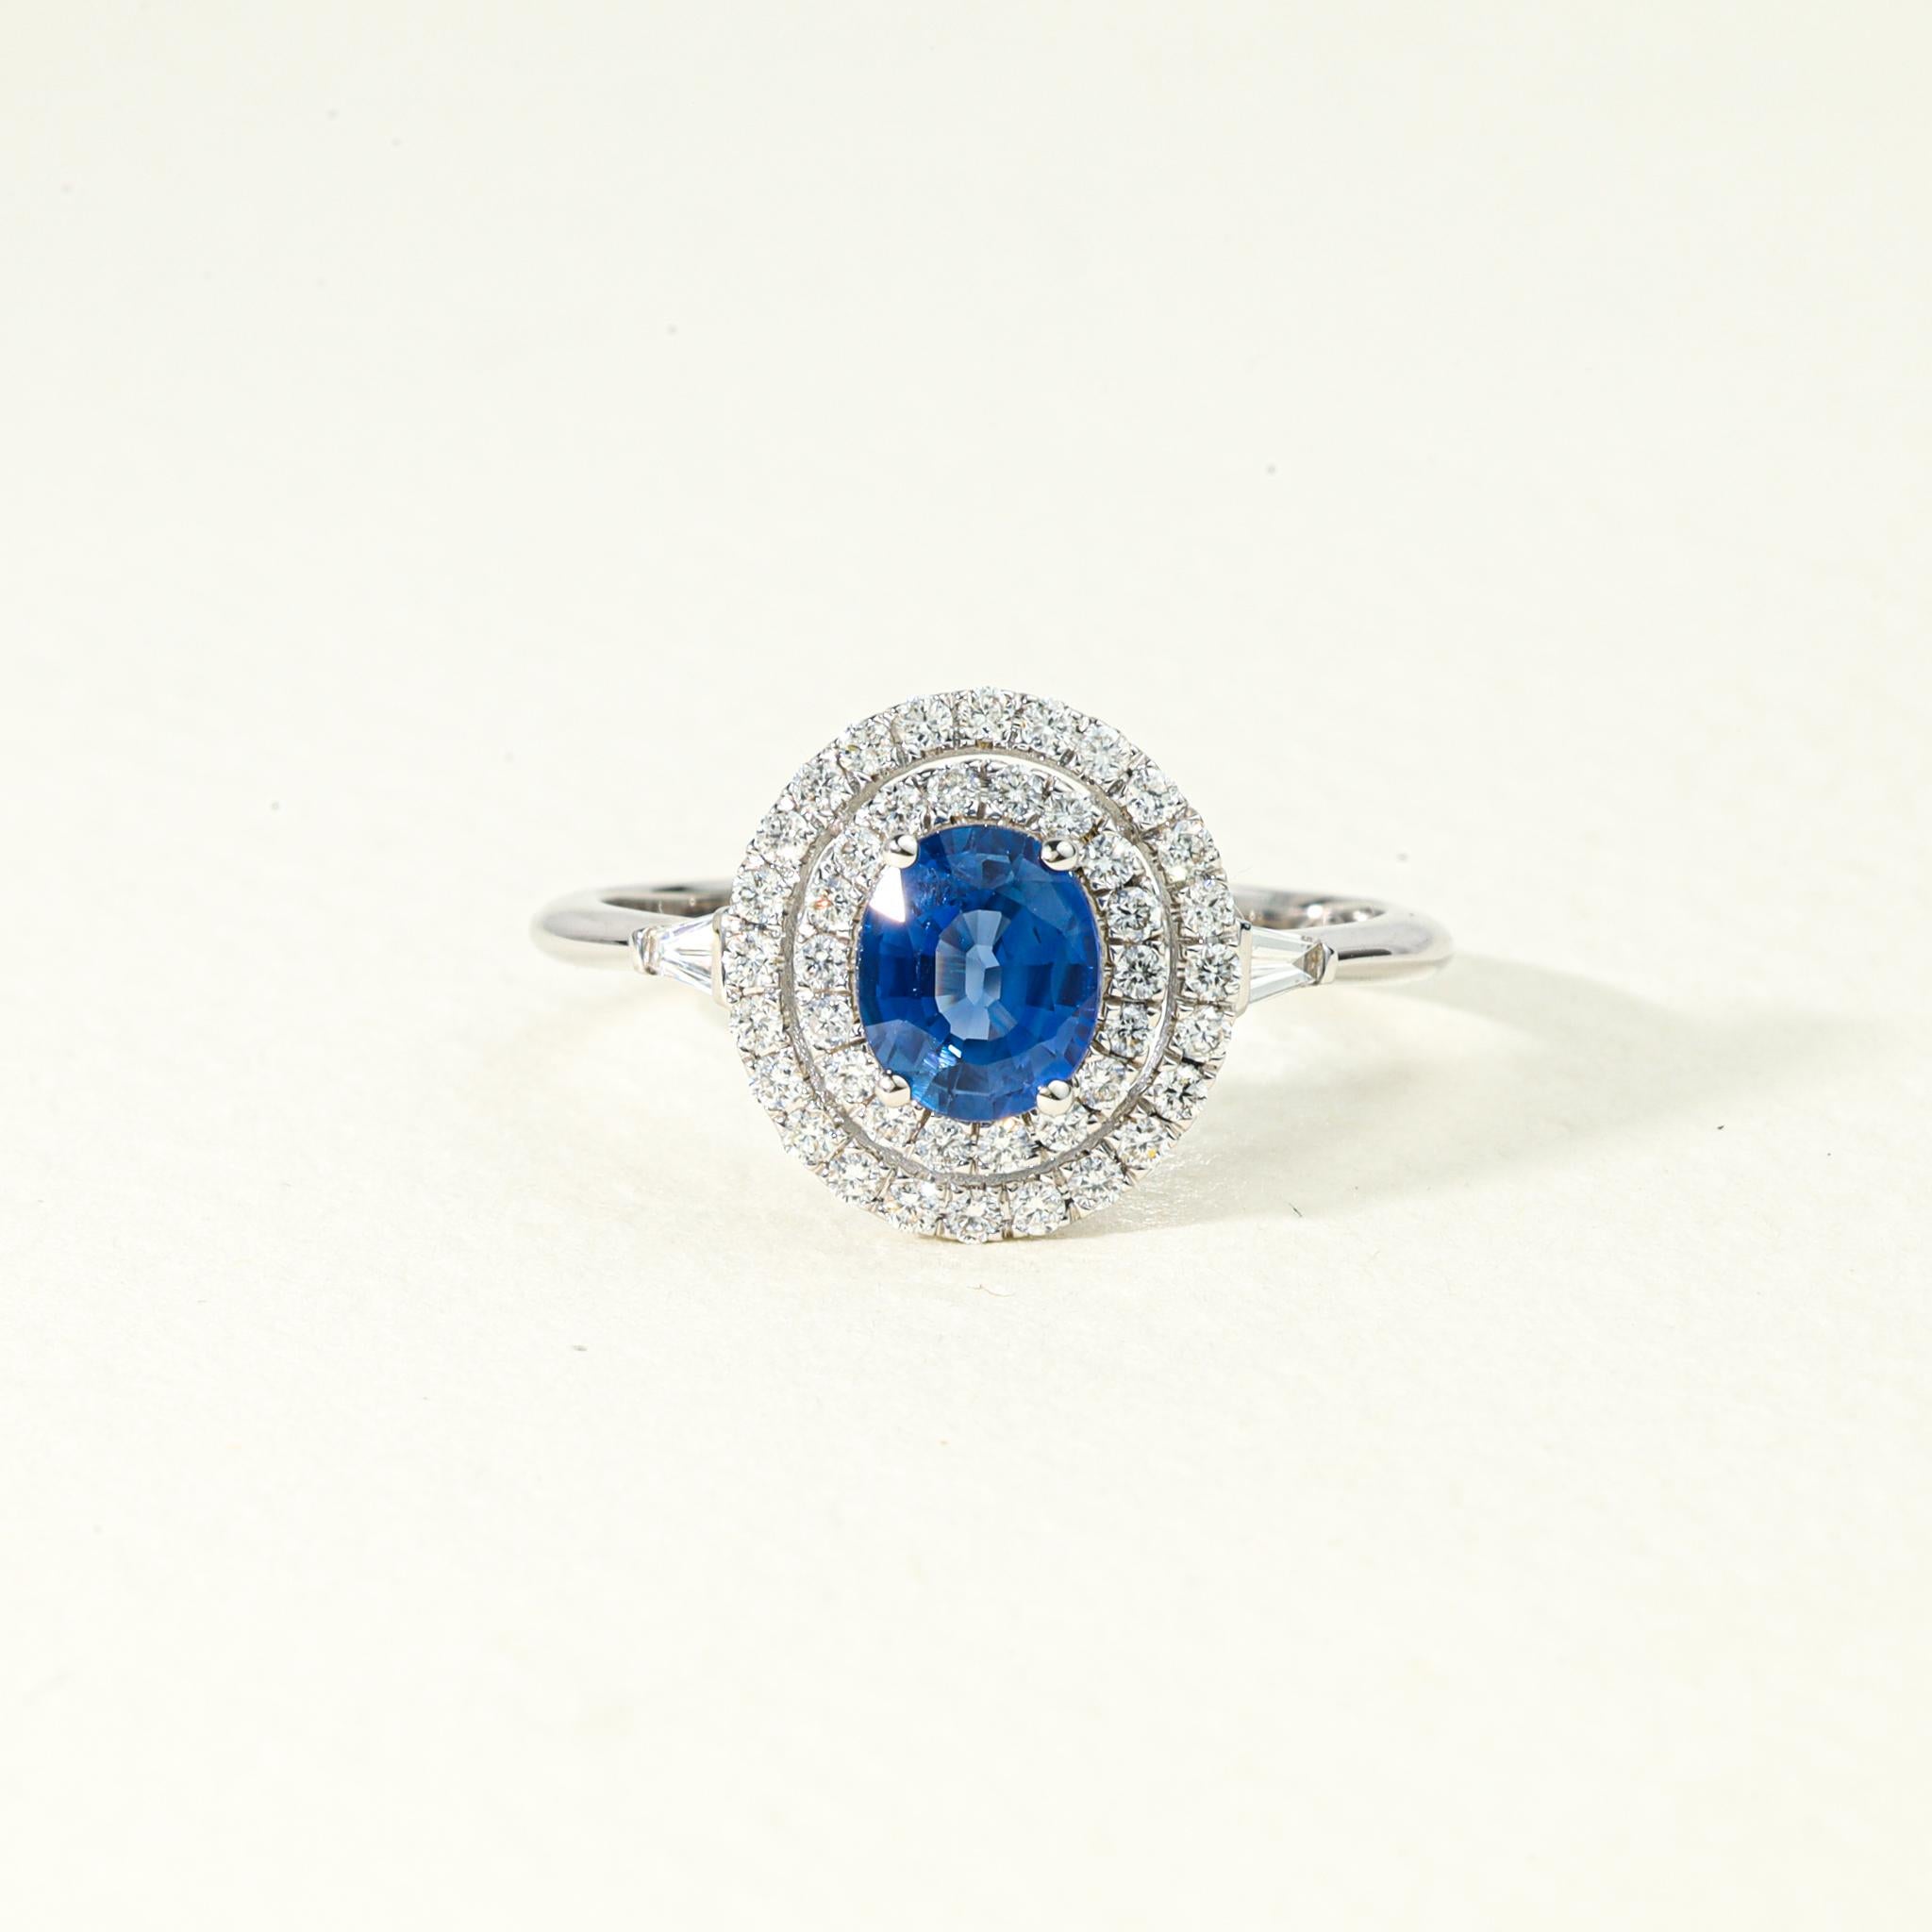 Oval Blue Sapphire Diamond Double Halo Cocktail Engagement Ring in White Gold

Available in 18k white gold.

Same design can be made also with other custom gemstones per request.

Product details:

- Solid gold

- Diamond - approx. 0.40 carat

-